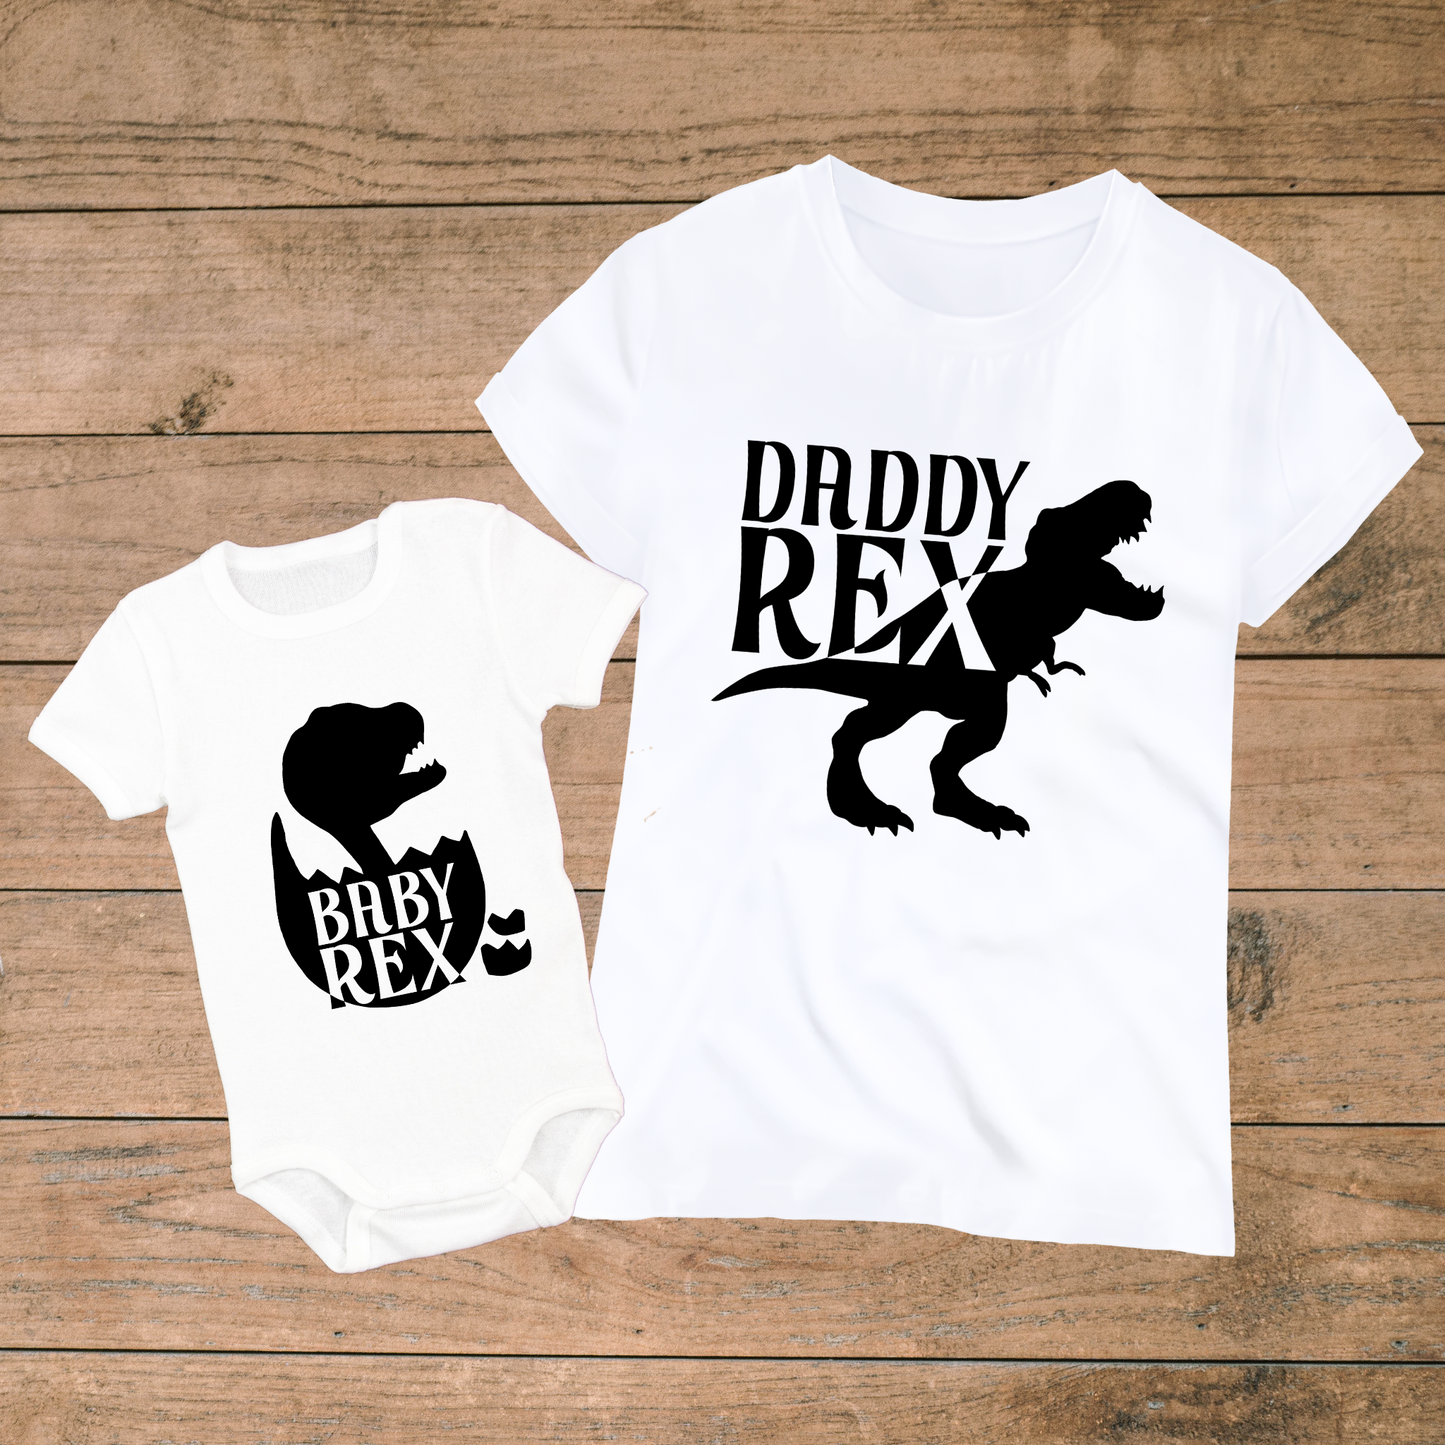 T-Rex Dinosaur - Father and Baby Shirts